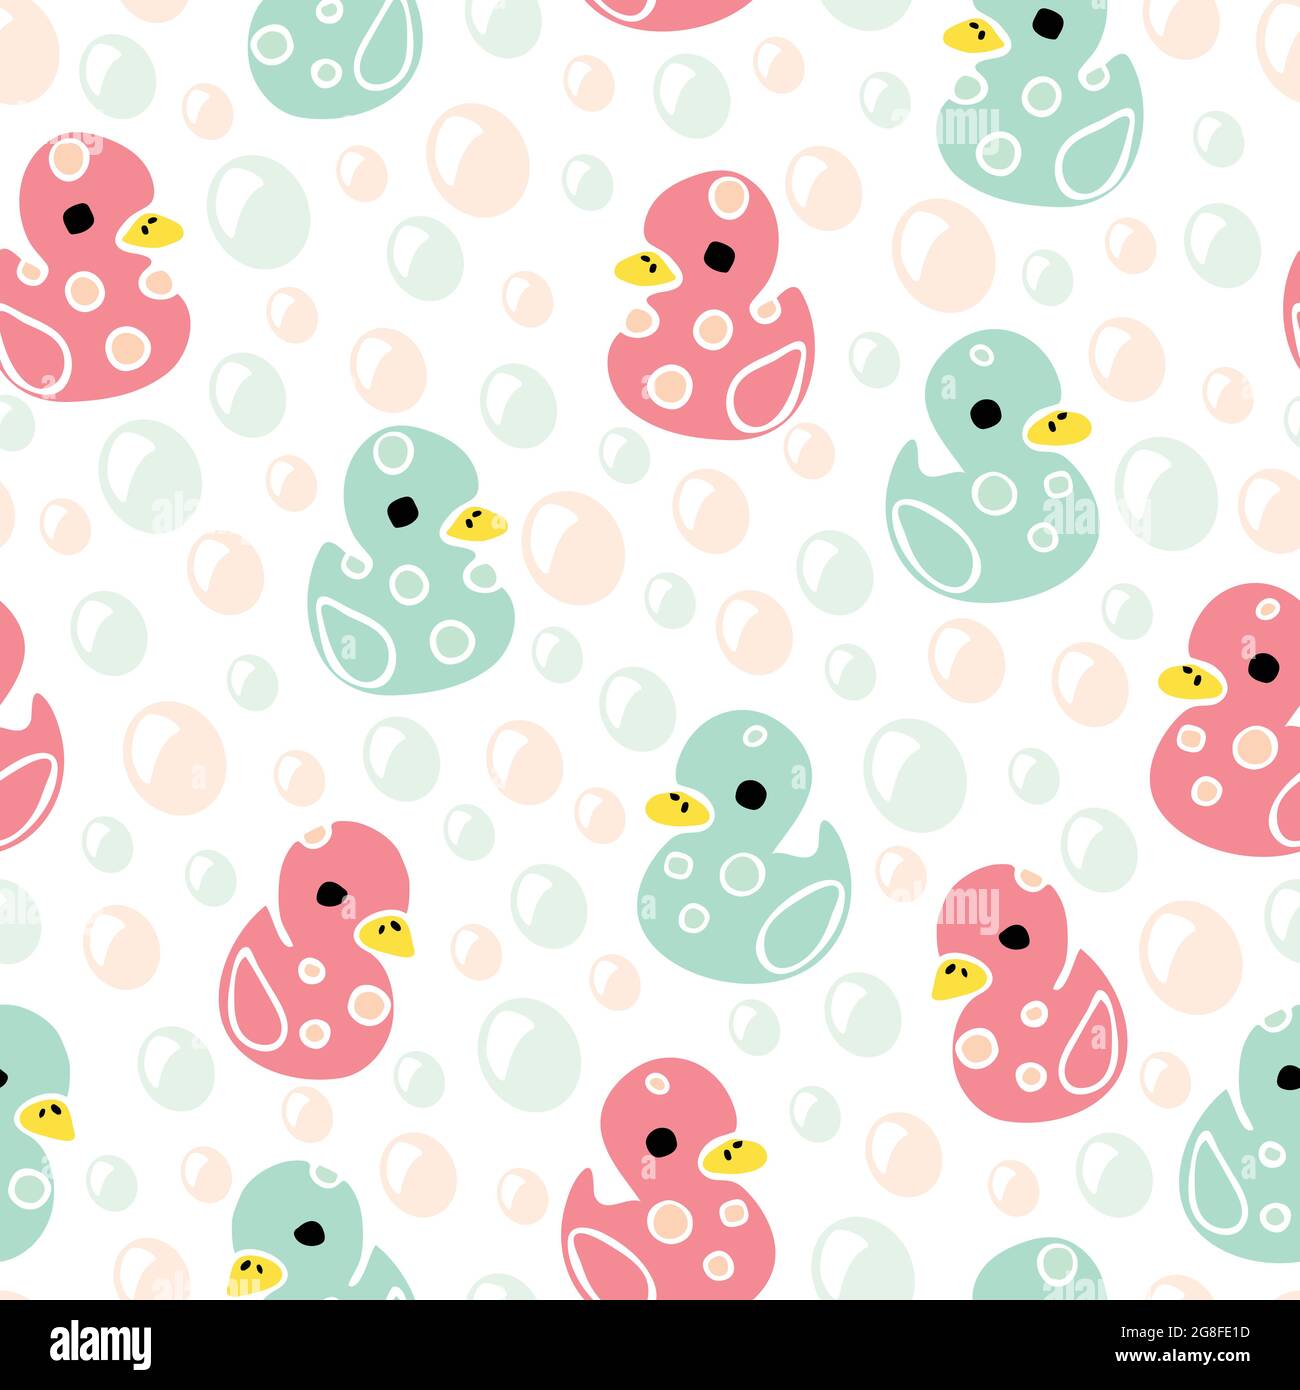 Duck Background Images  Free Download on Freepik